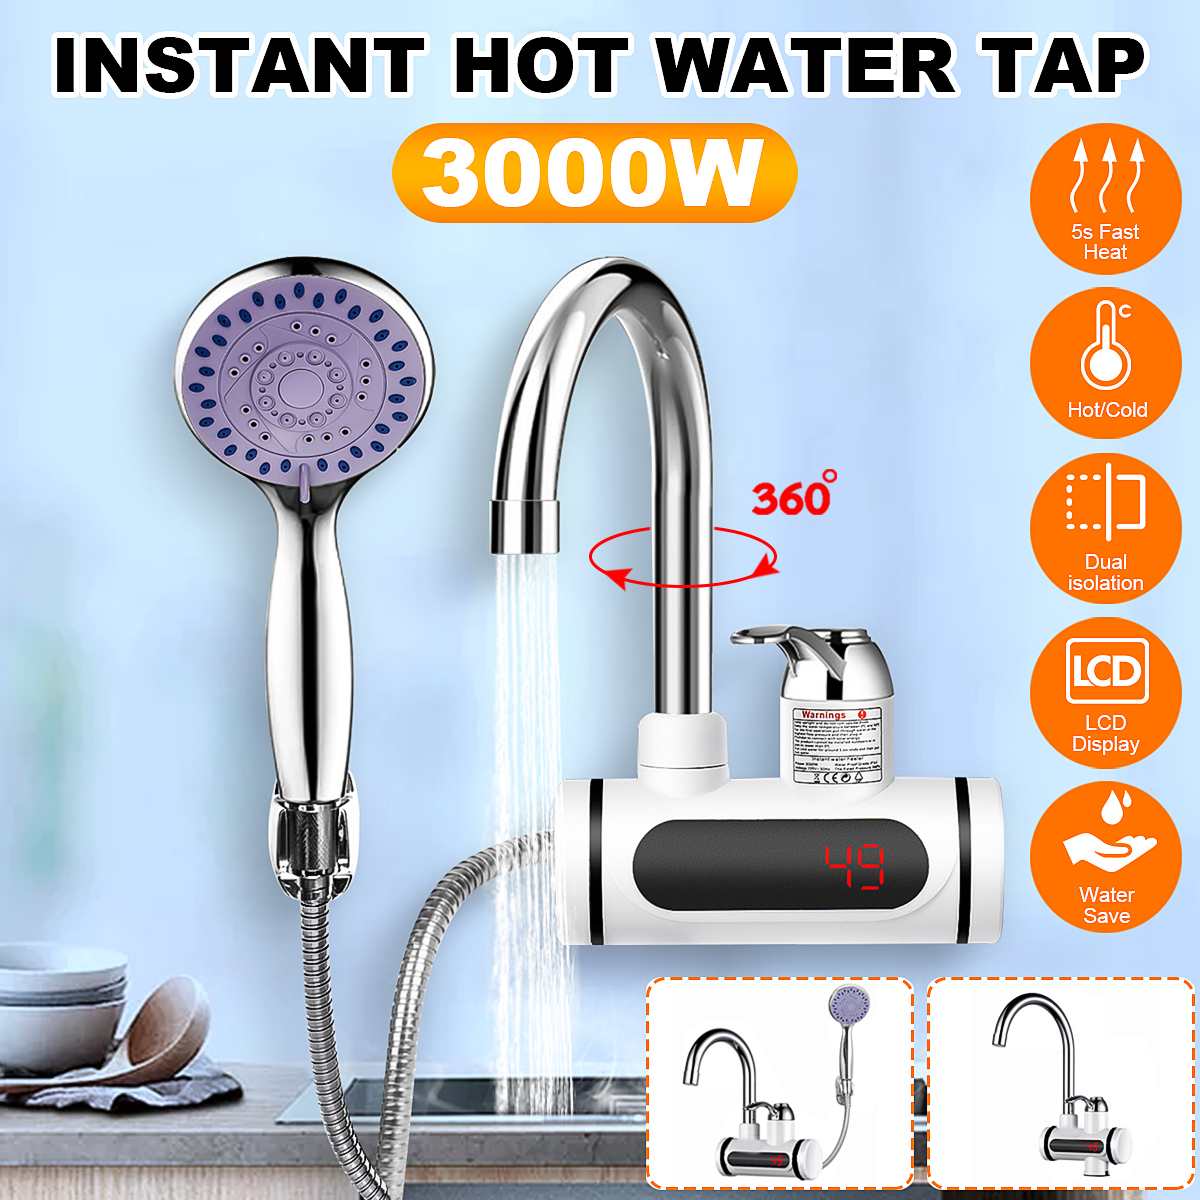 3000W 220V Instant Electric Shower Water Heater Hot Faucet Kitchen Electric Tap Water Heating Instantaneou Water Heater+Shower